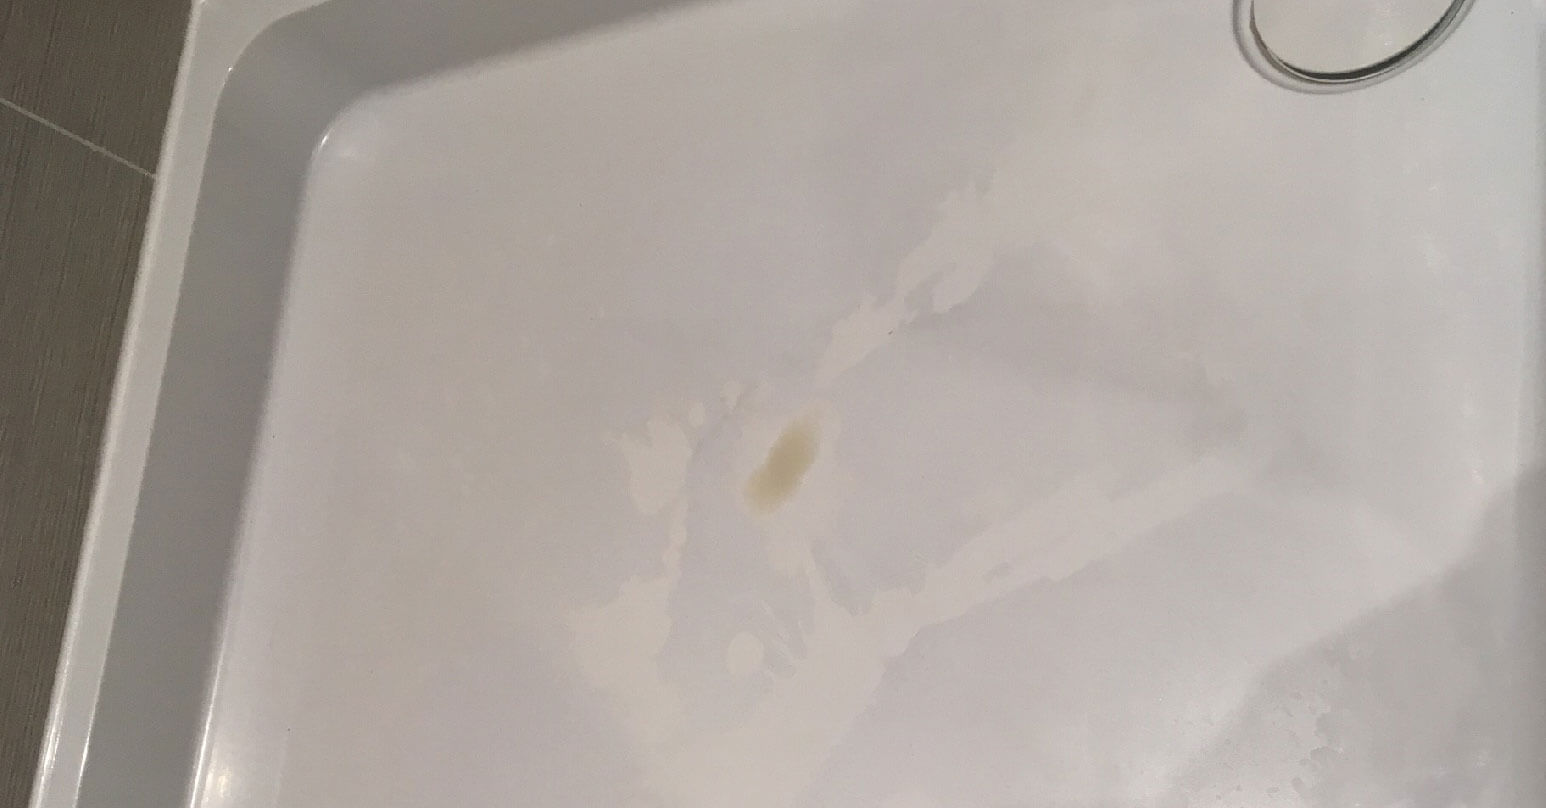 Discoloured shower tray - Before repair